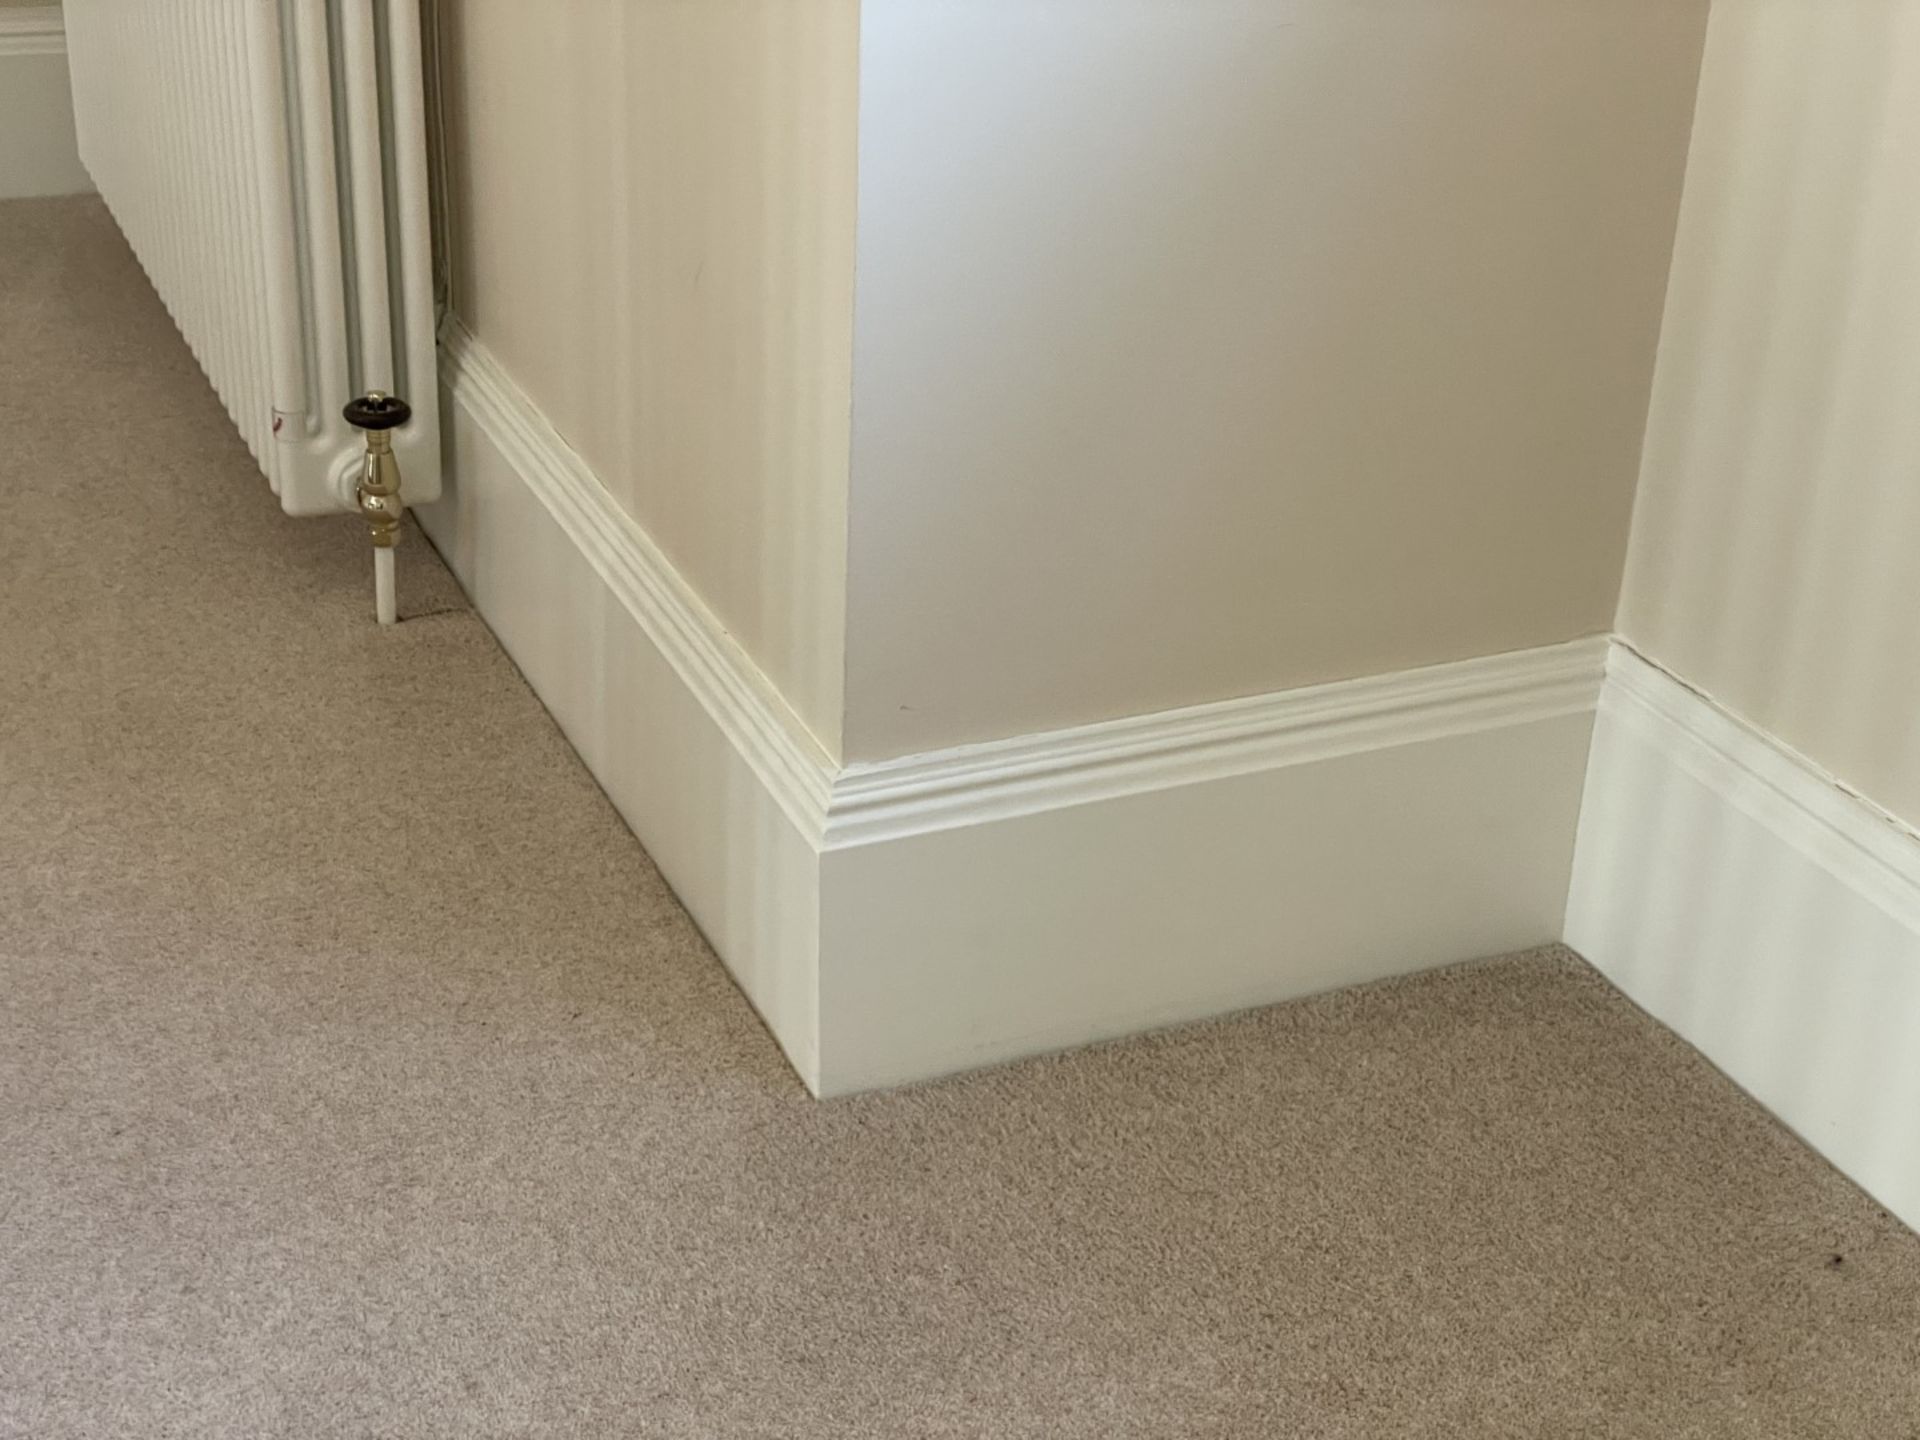 Approximately 20-Metres of Painted Timber Wooden Skirting Boards, In White - Ref: PAN219 - CL896 - - Image 8 of 8